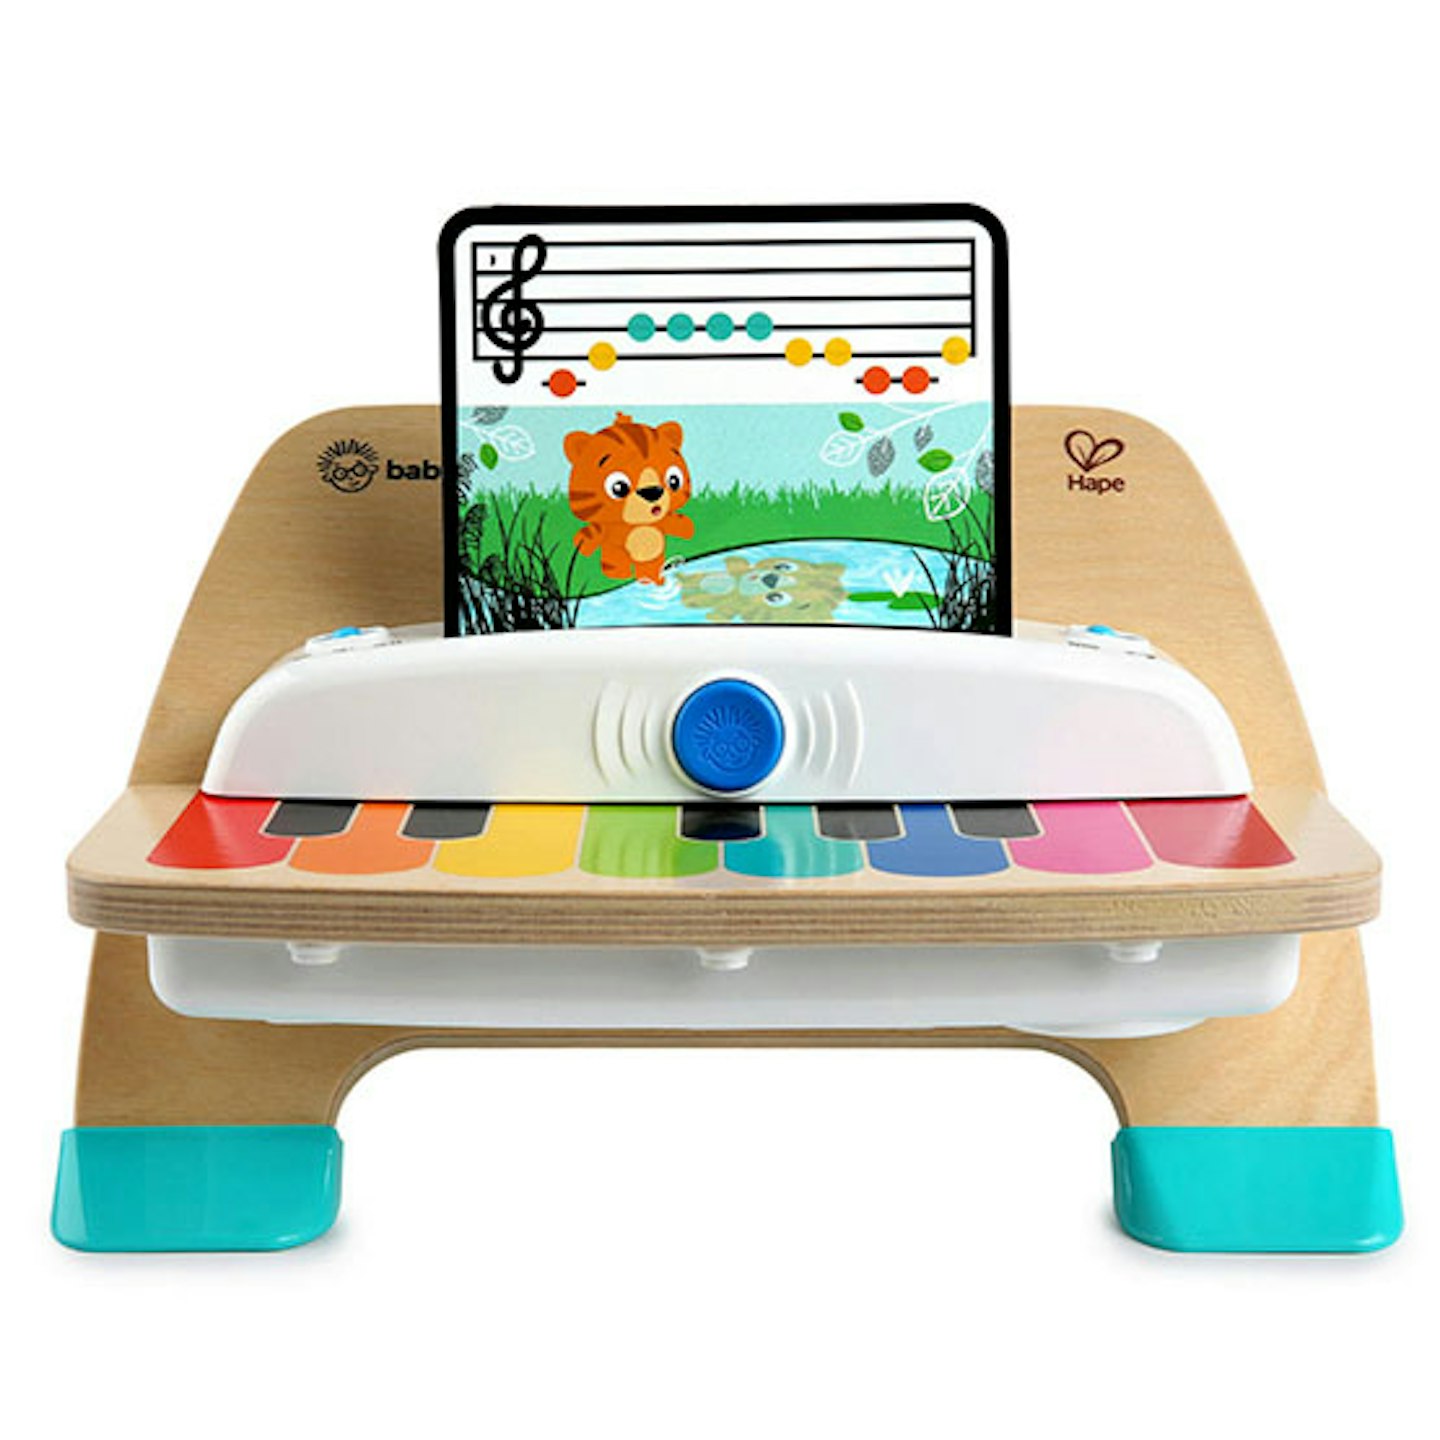 Best for learning music: Baby Einstein Magic Touch Piano